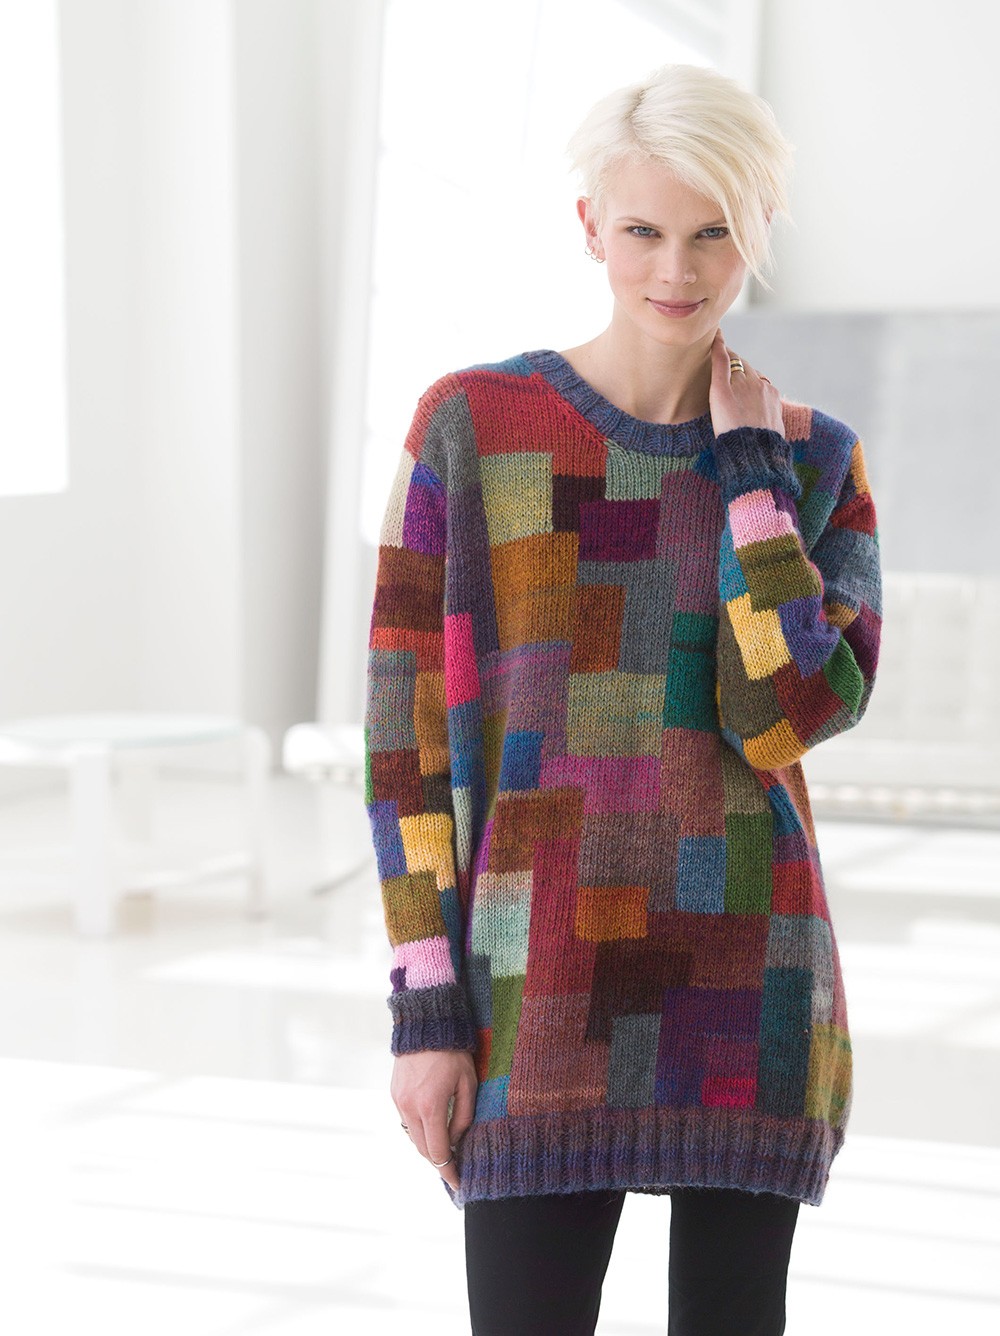 Free knitting pattern for a modern color block sweater